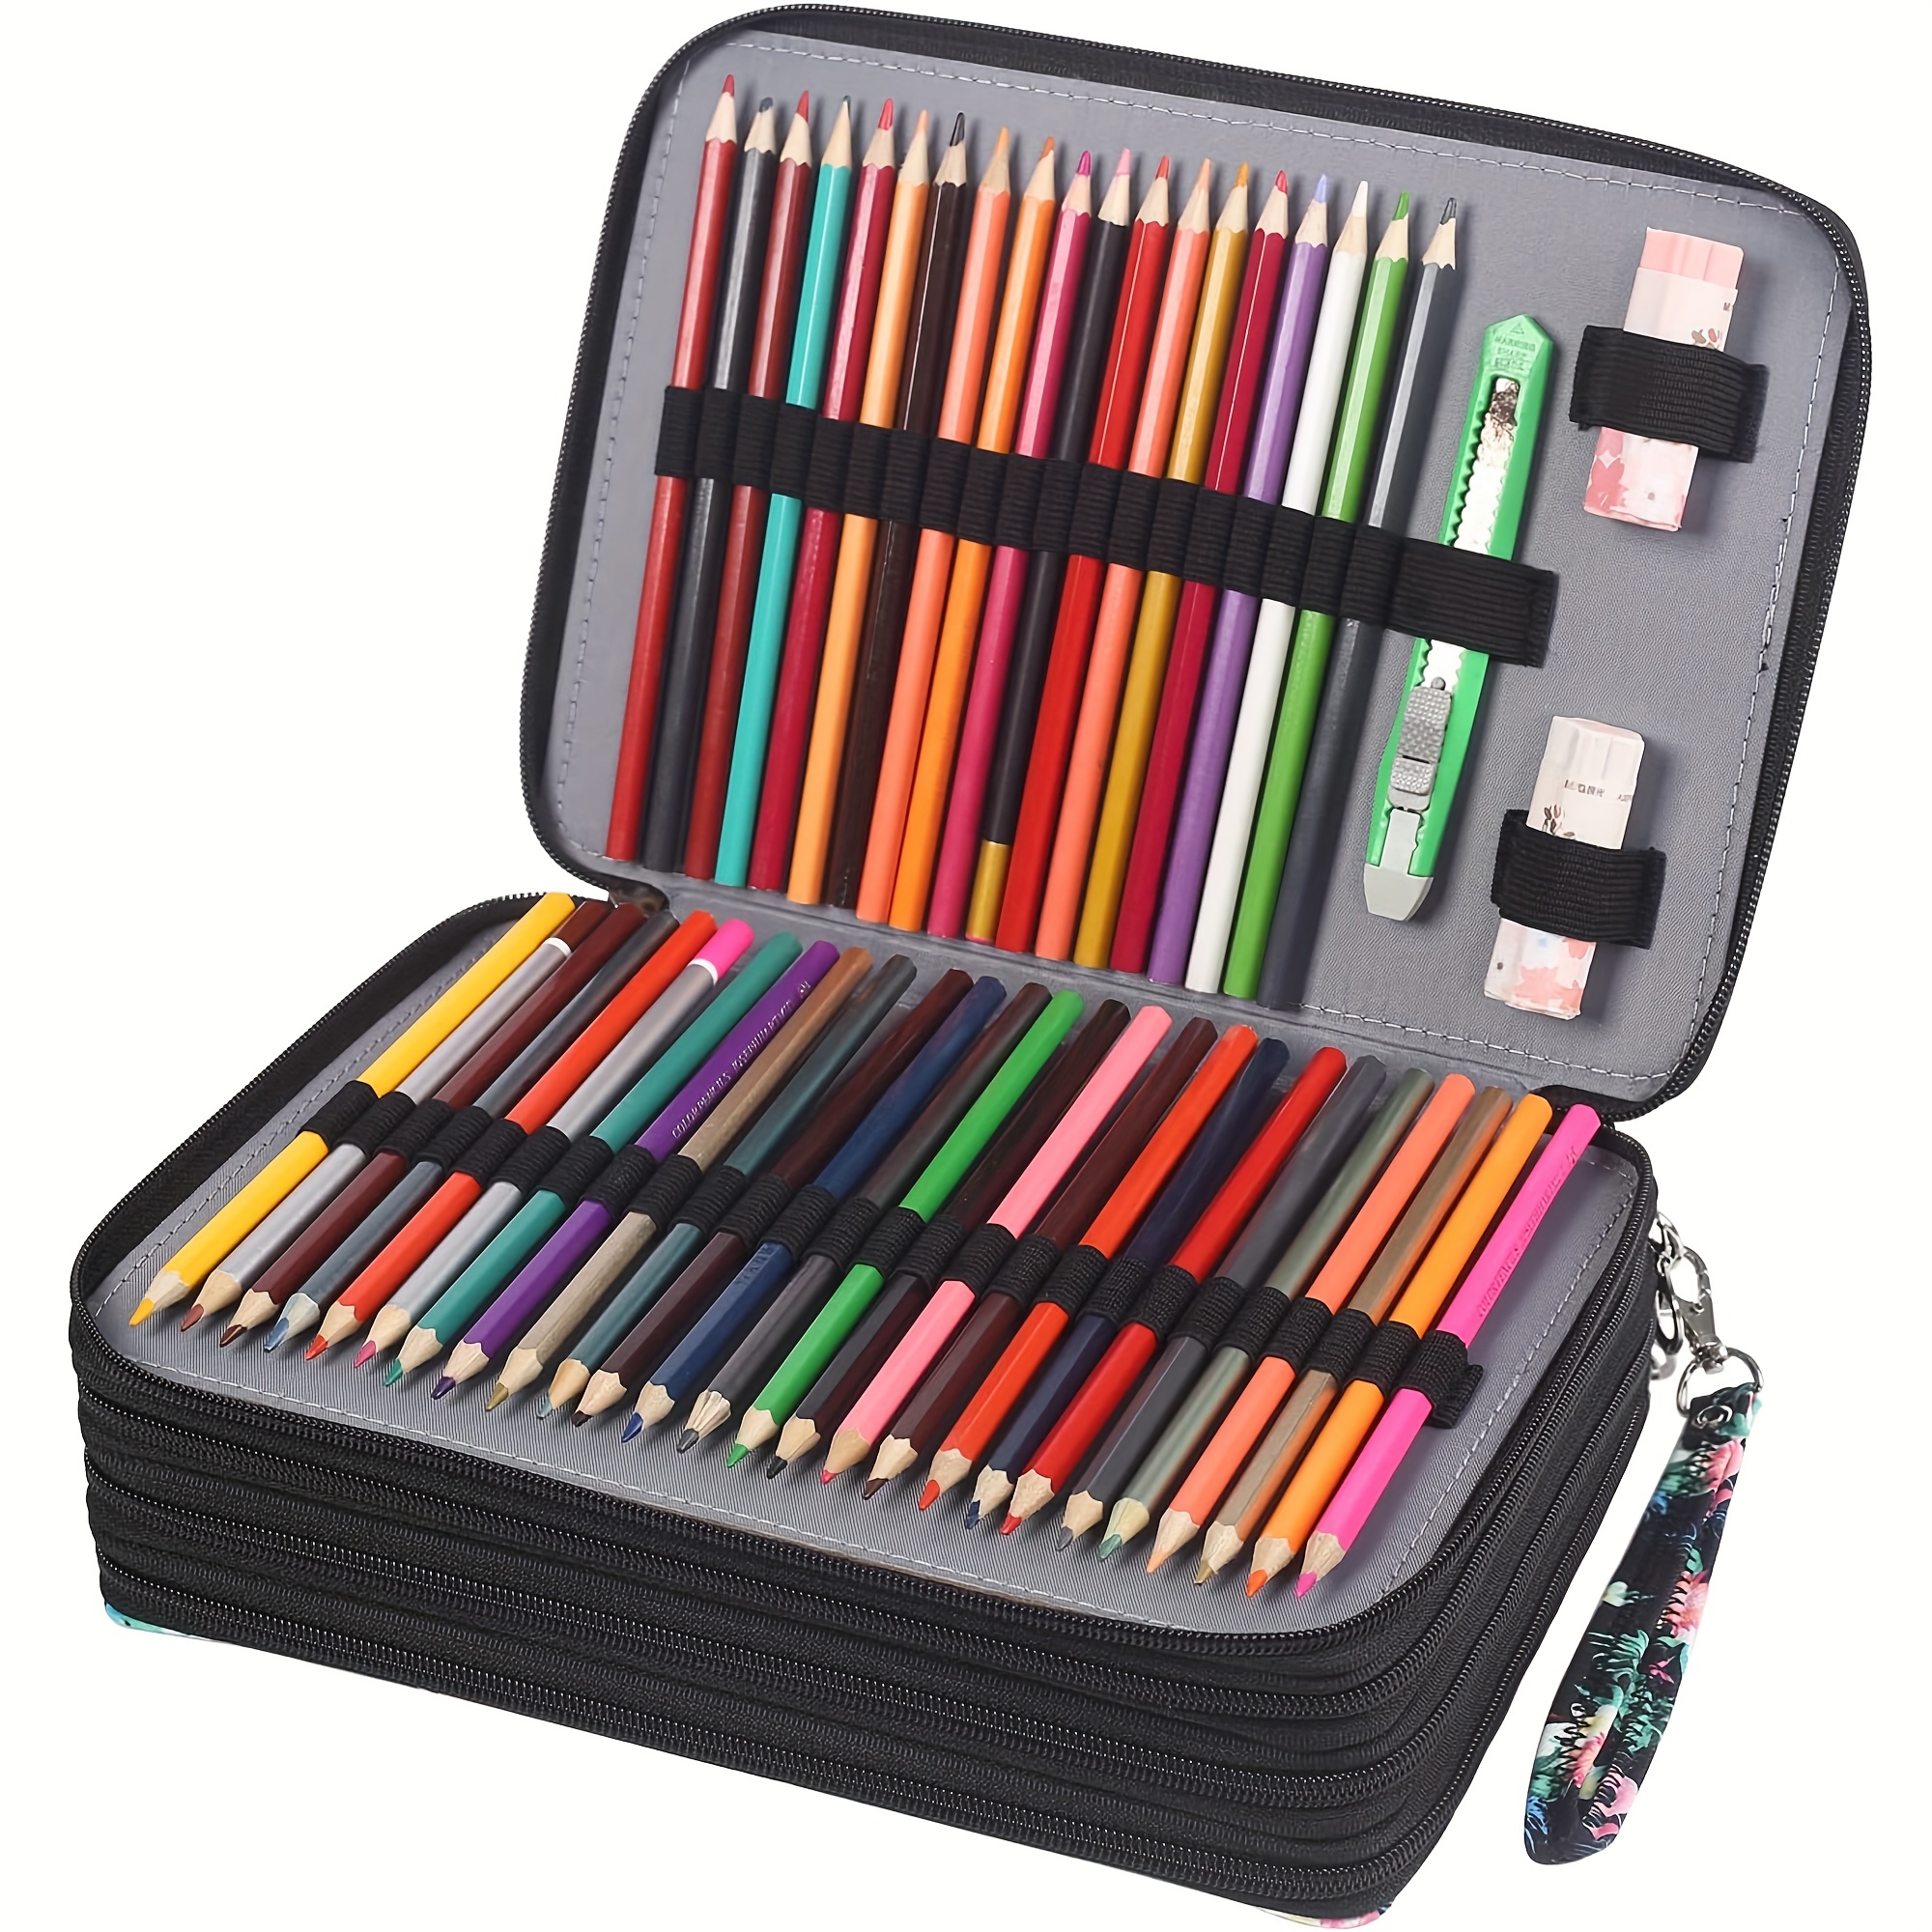 YZK 200 Slots Colored Pencil Case-Twill Oxford Pencil Holder with Zipper  Closure Colored Pencil Organizer for Watercolor Pens or Makers Large  Capacity